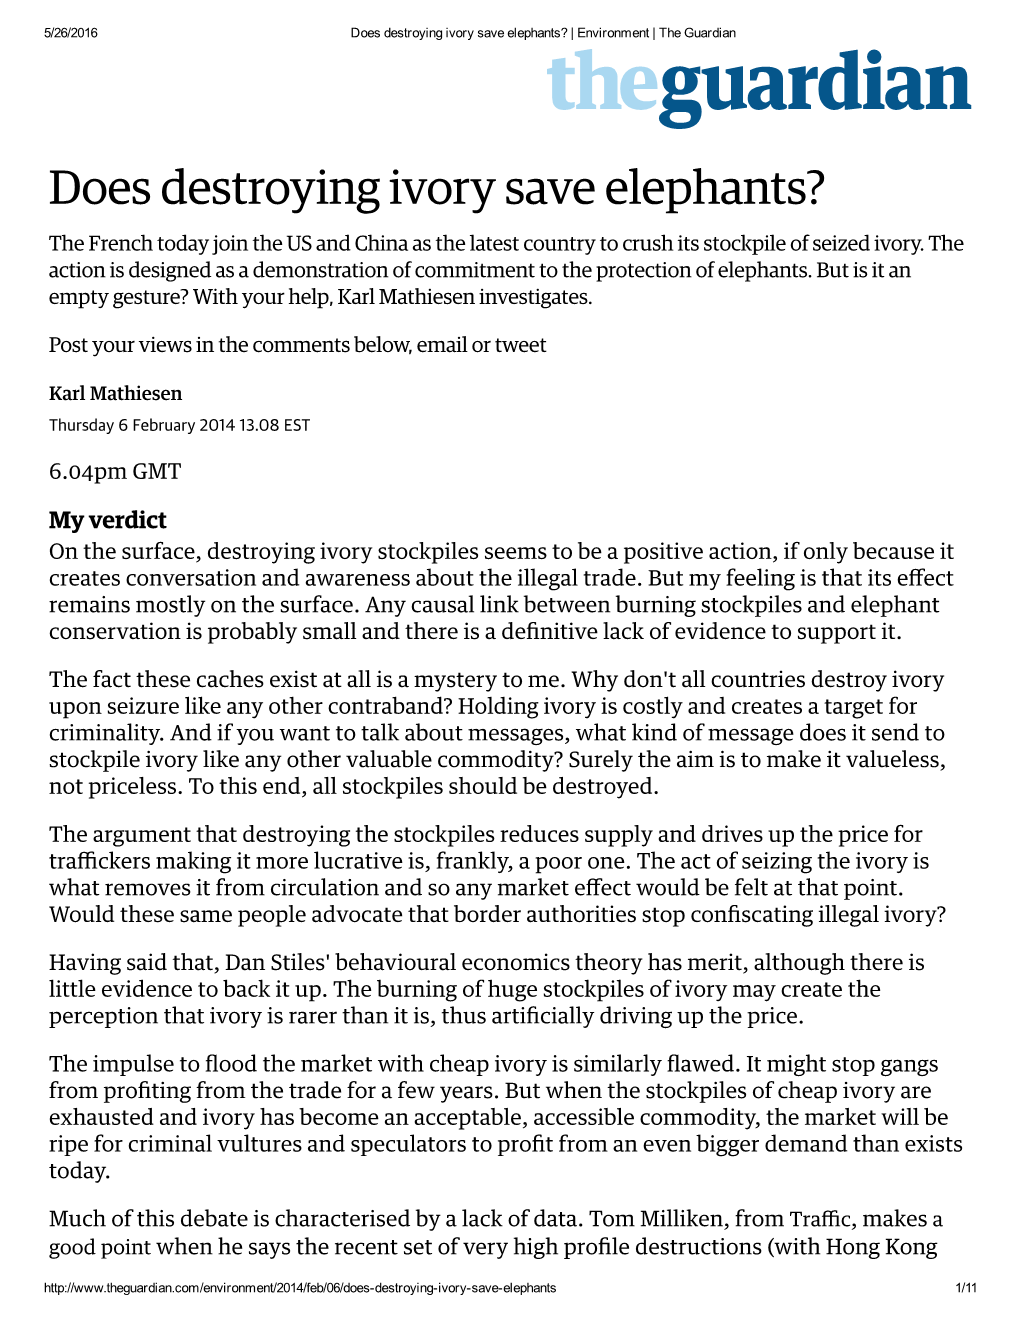 Does Destroying Ivory Save Elephants? | Environment | the Guardian